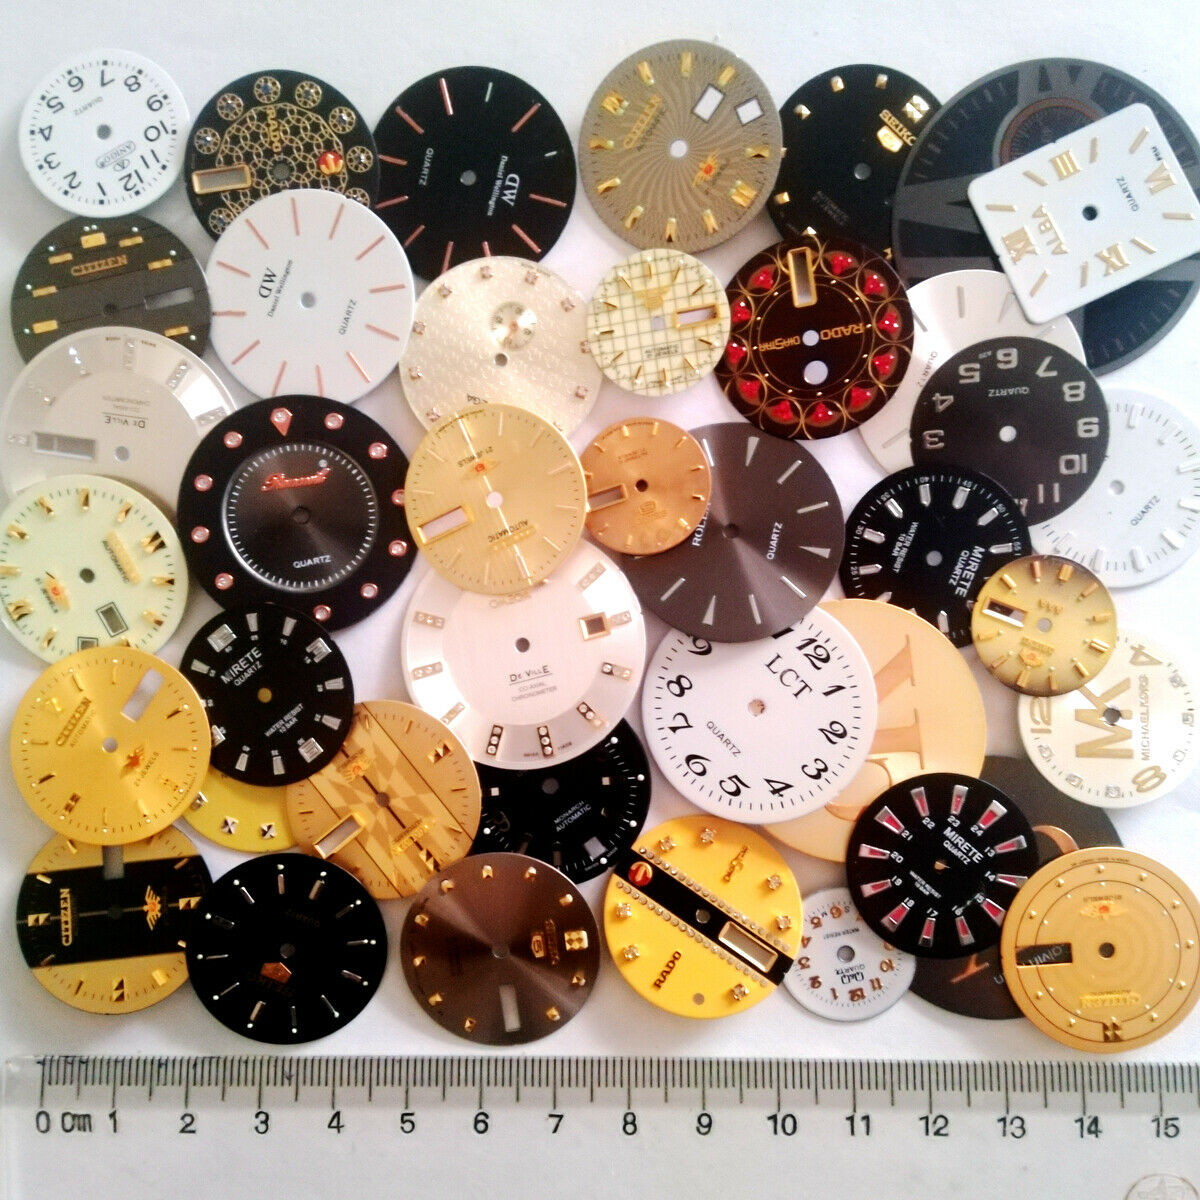 40pcs Lot Of Steampunk Watch Faces Dials Parts For Jewelry Making Industrial Art